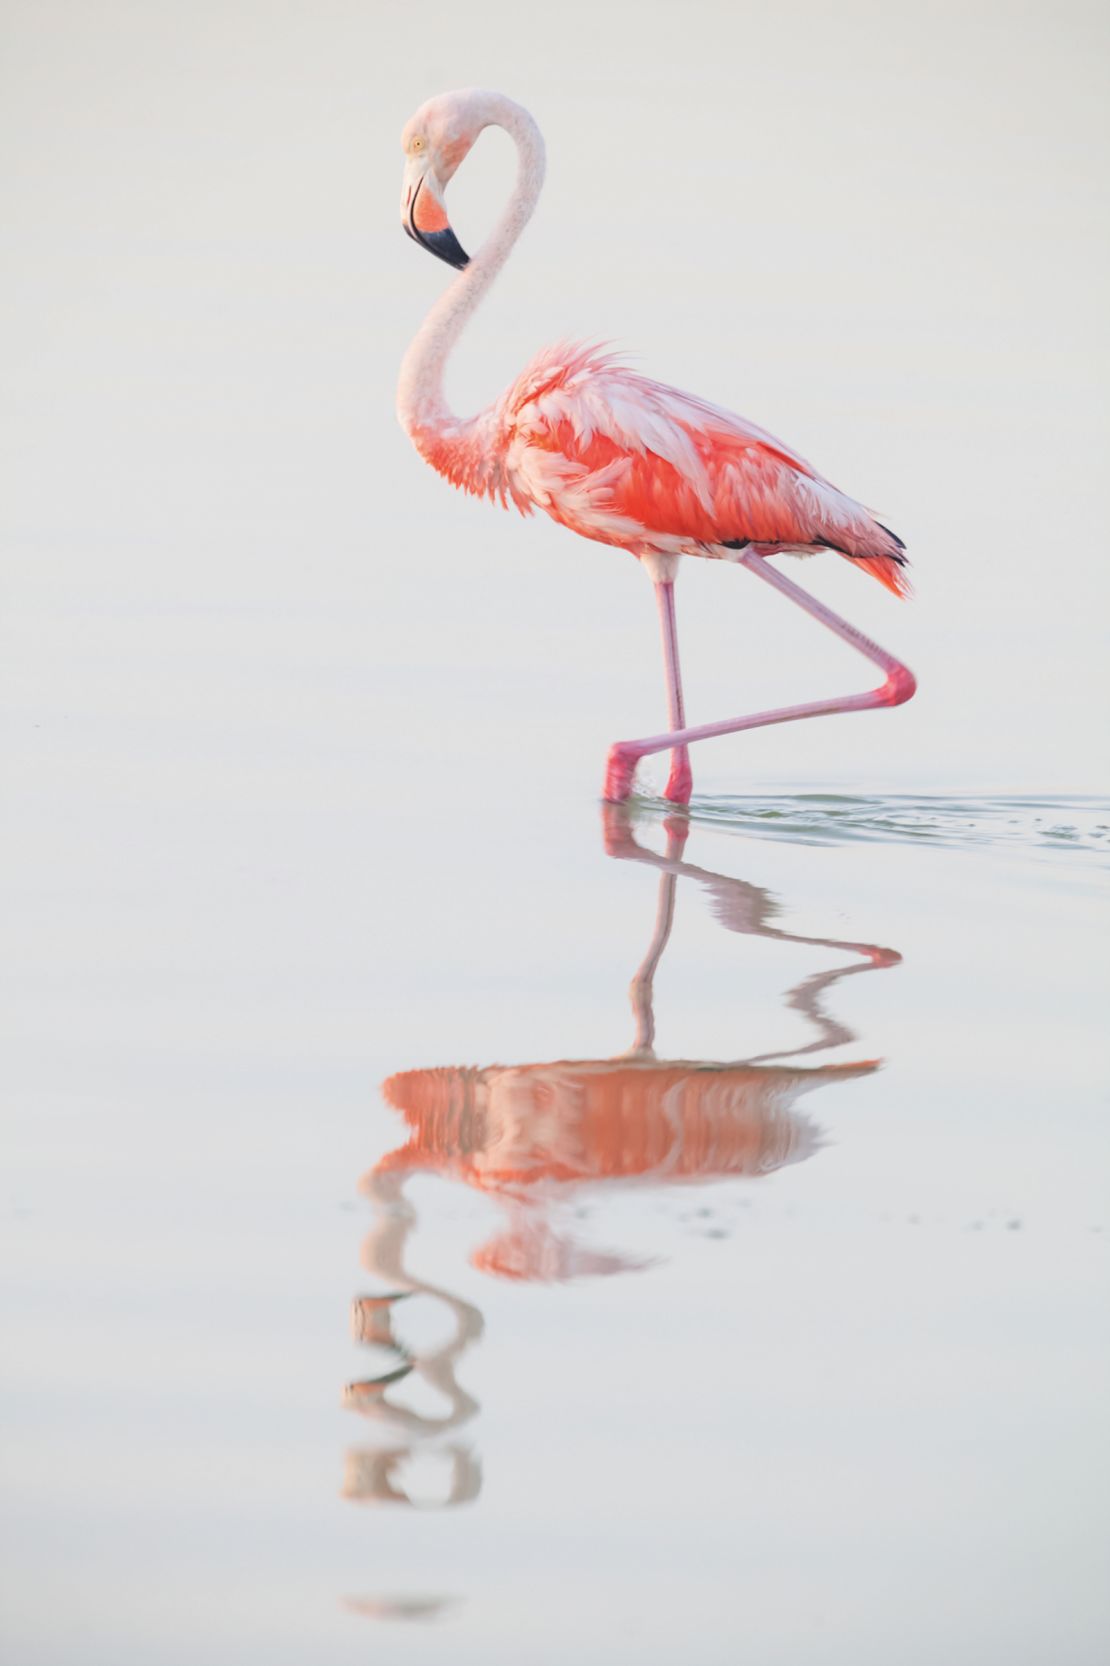 The conservation photographer capturing mesmerizing images of Mexico's  flamingos